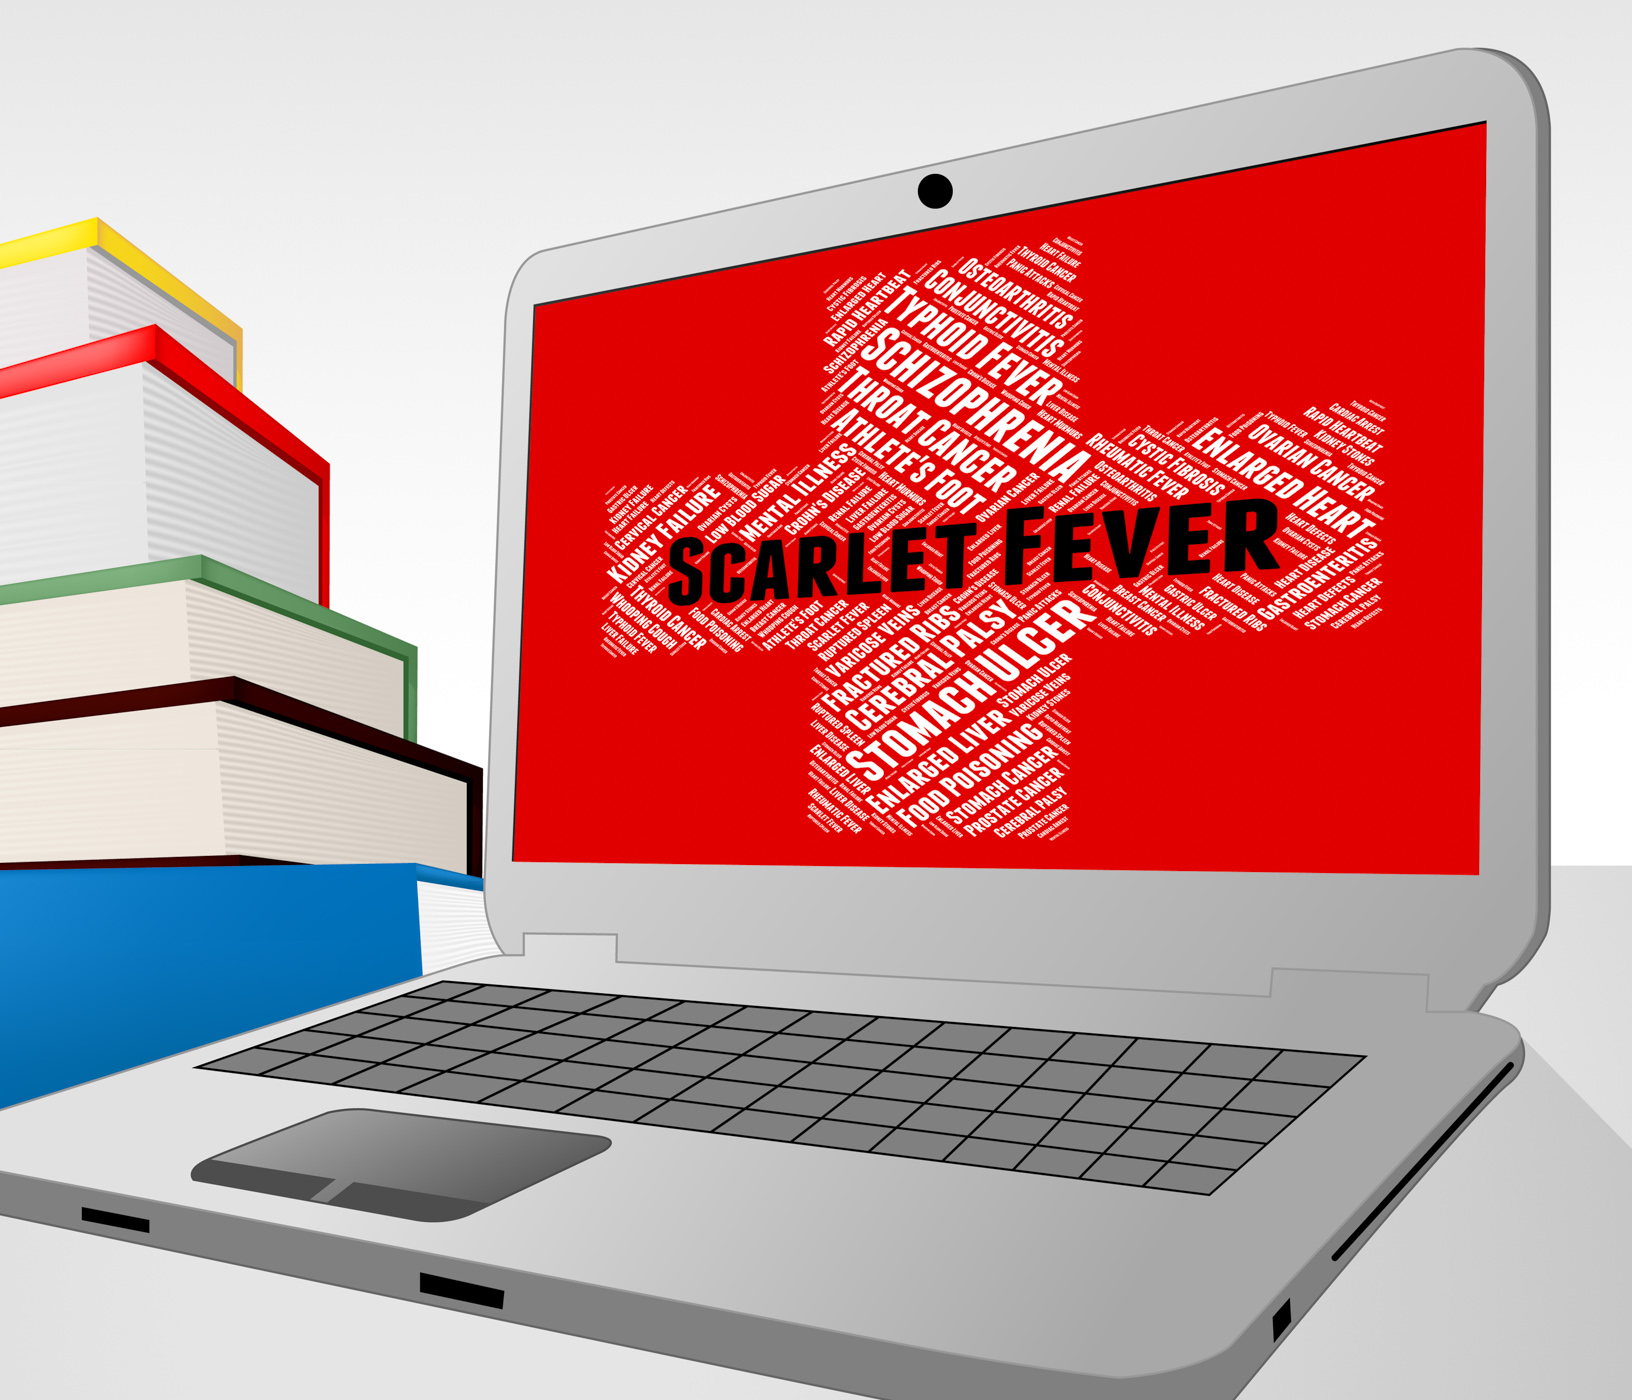 Scarlet fever represents ill health and attack photo